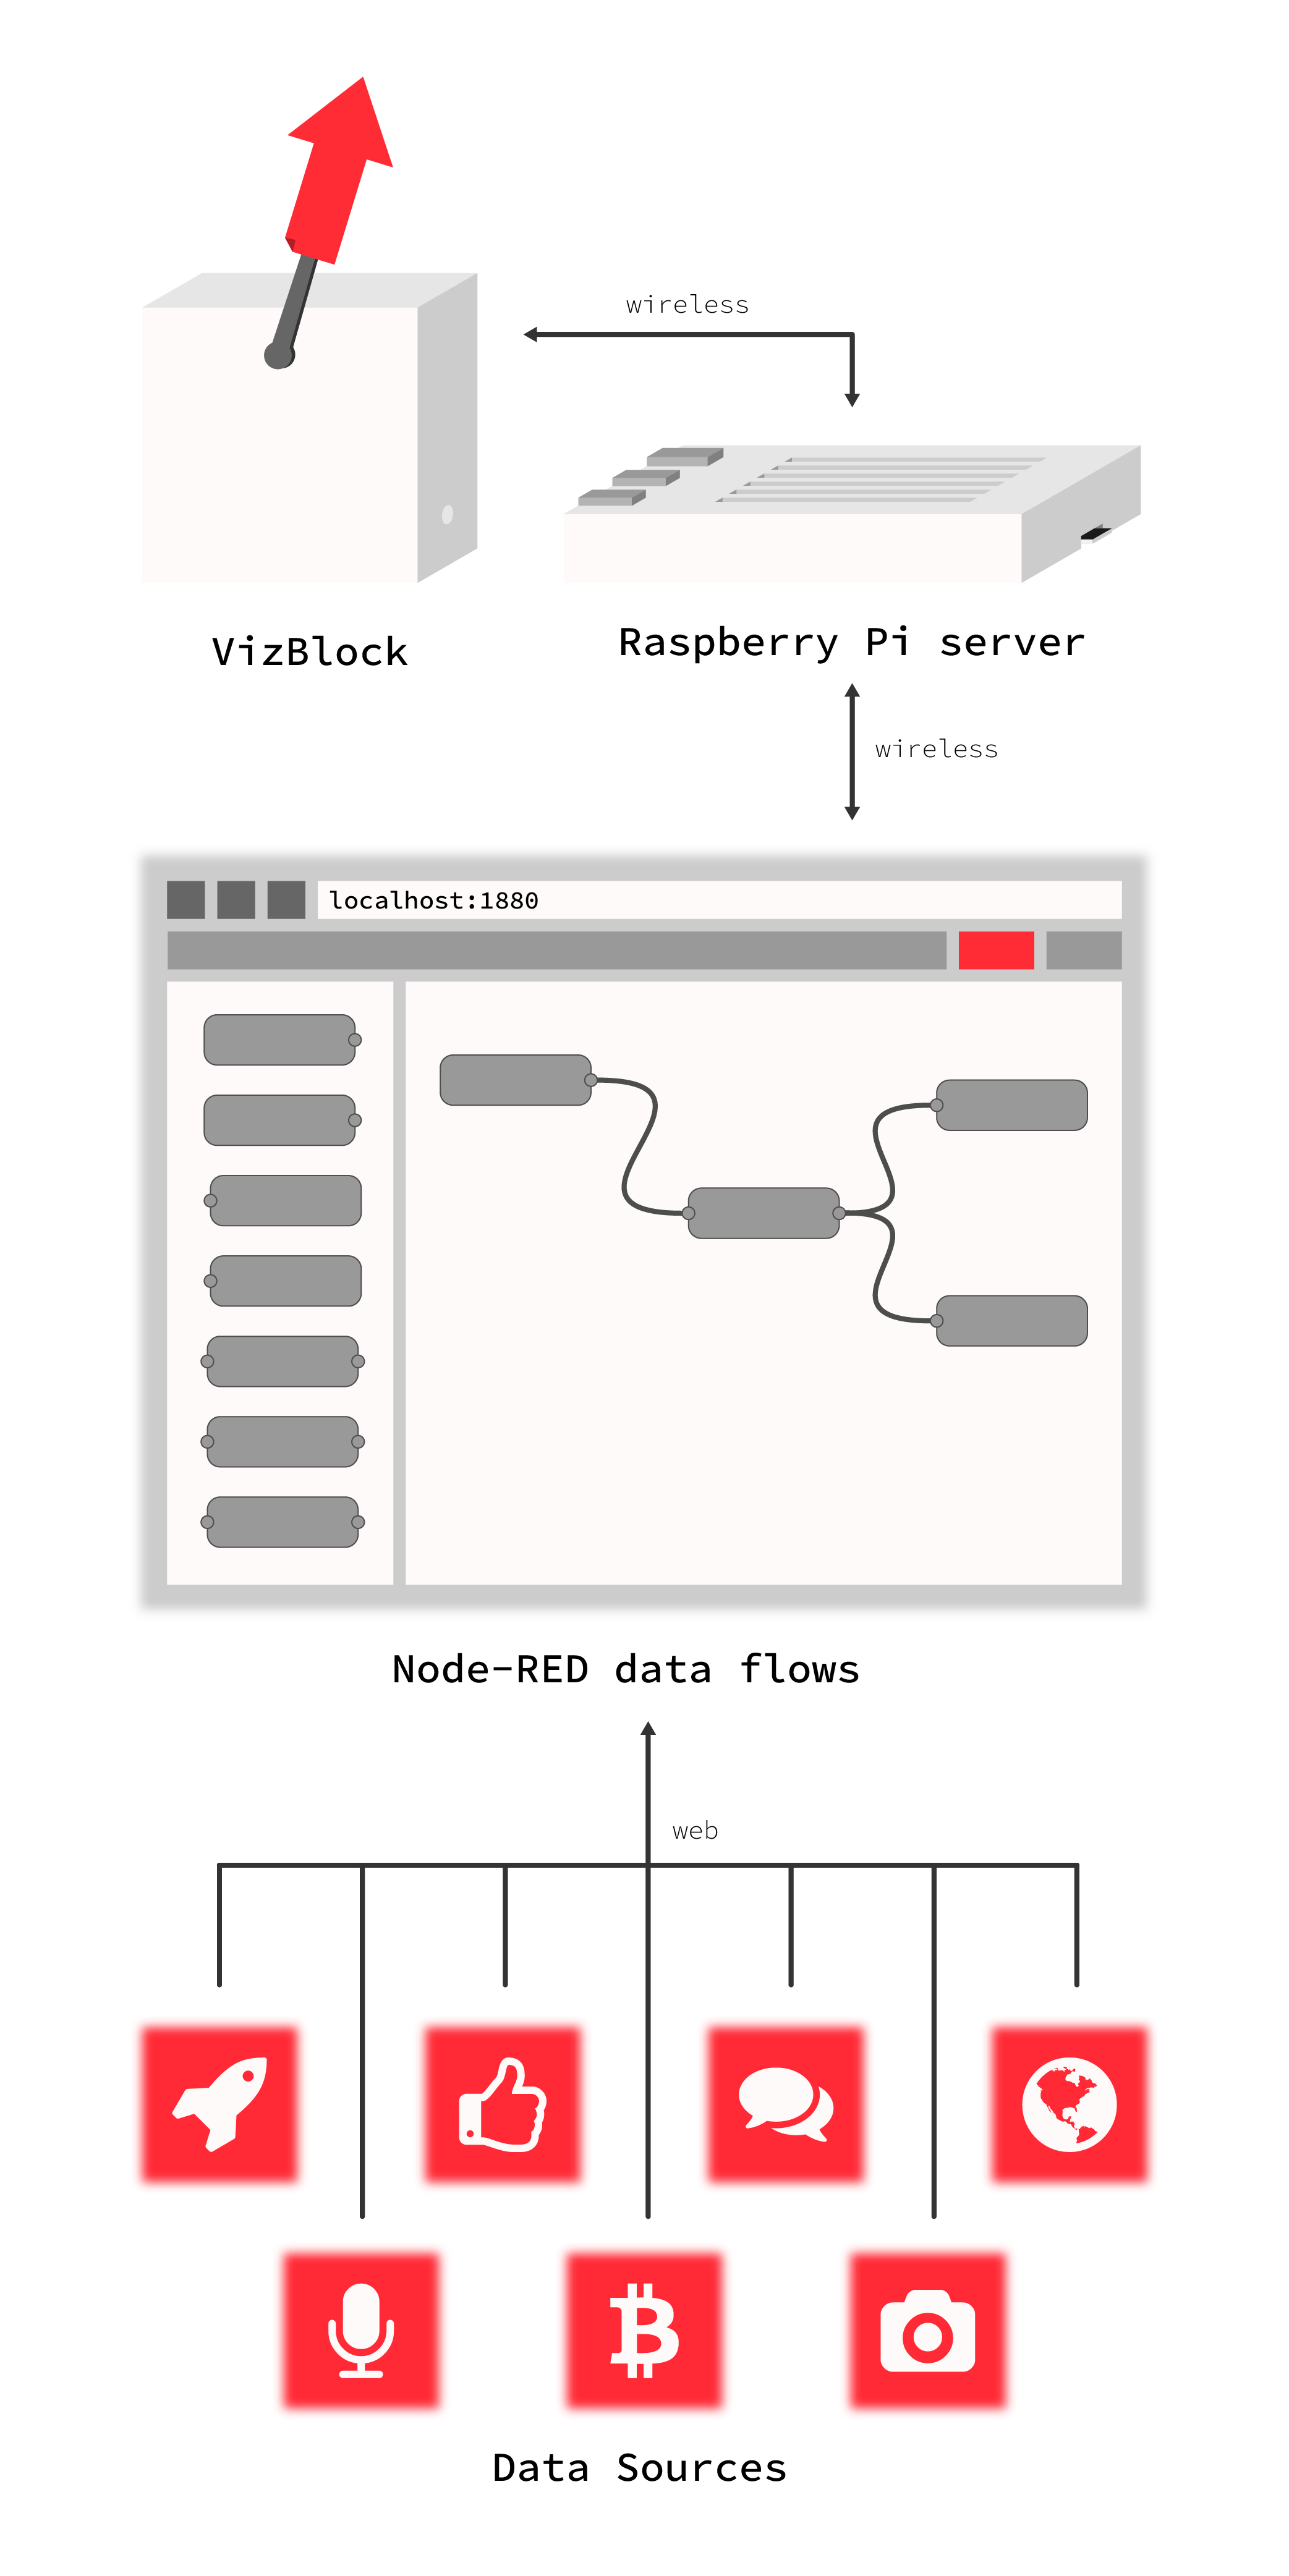 Vertical illustration of how the VizBlock connects to data sources through the Node-RED platform.